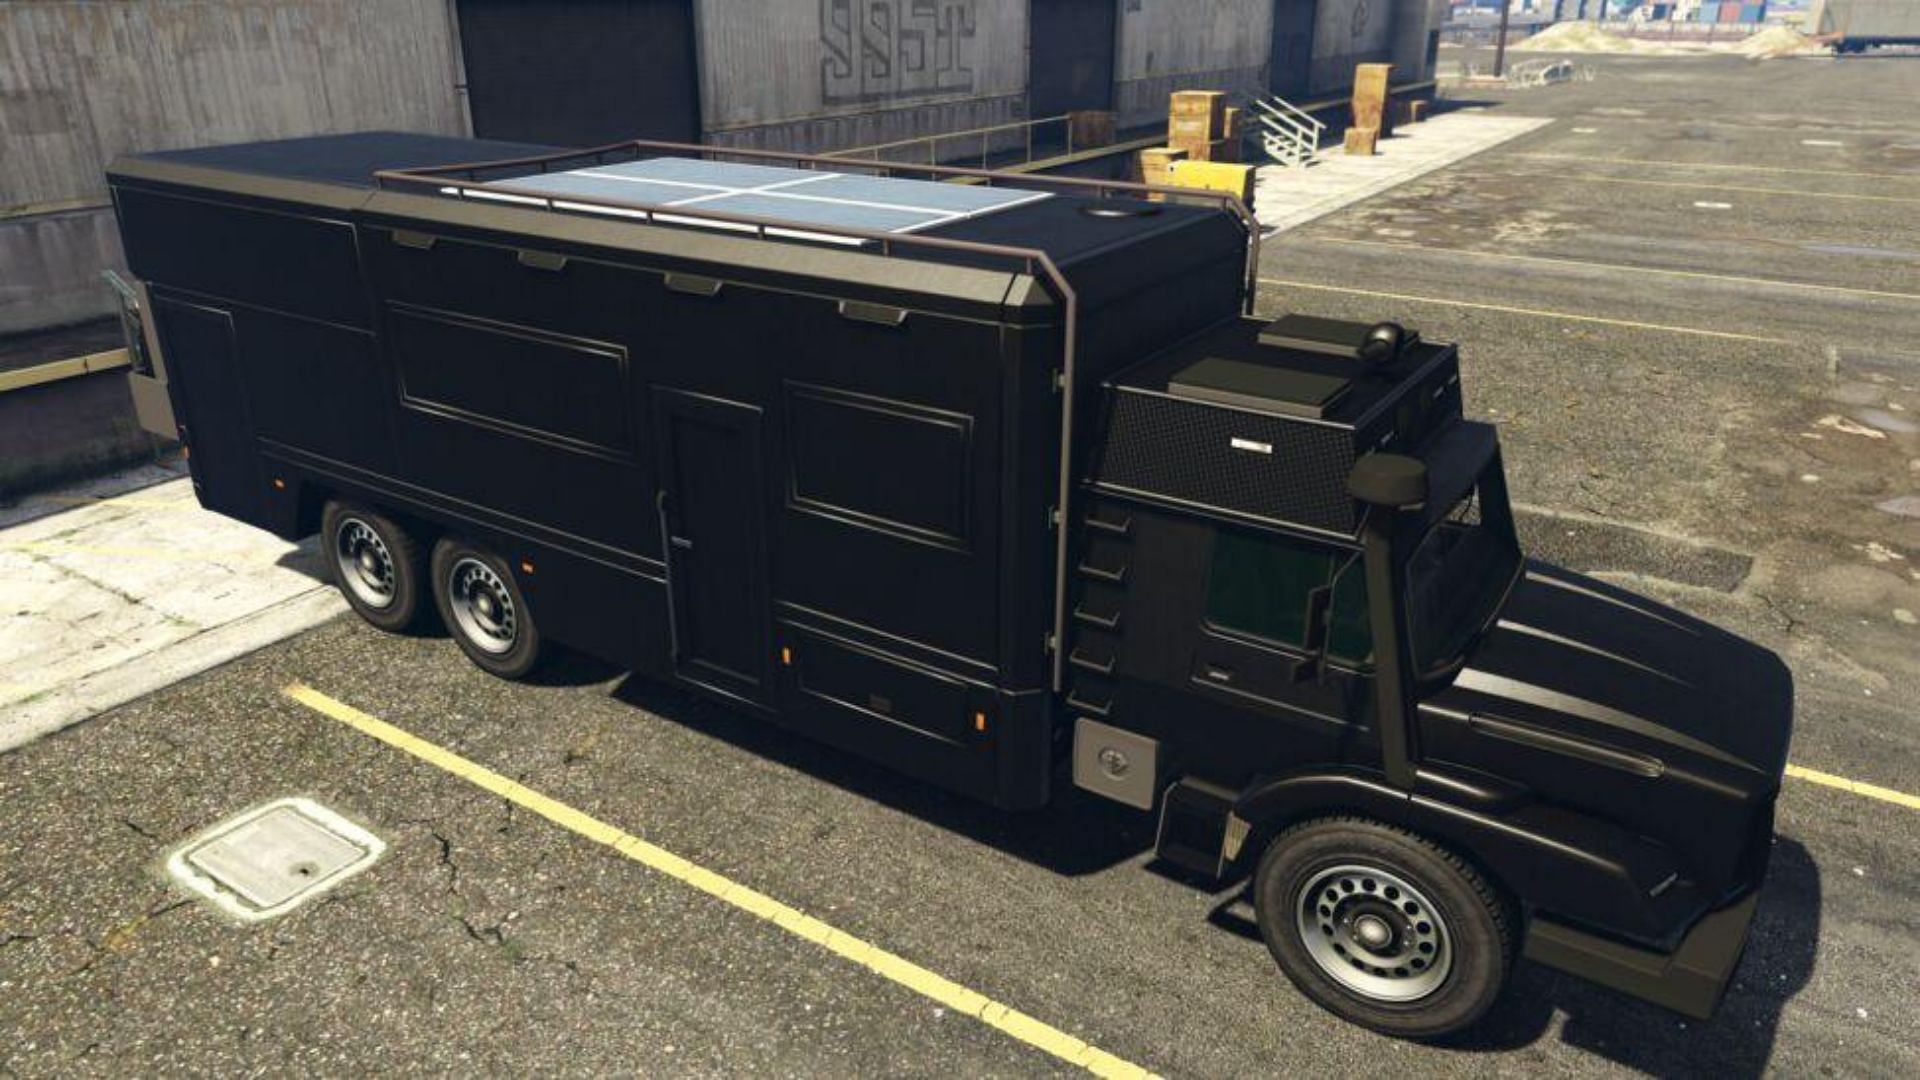 The Terabyte is one of the most heavily armored vehicles in GTA 5 (Image via Rockstar Games)